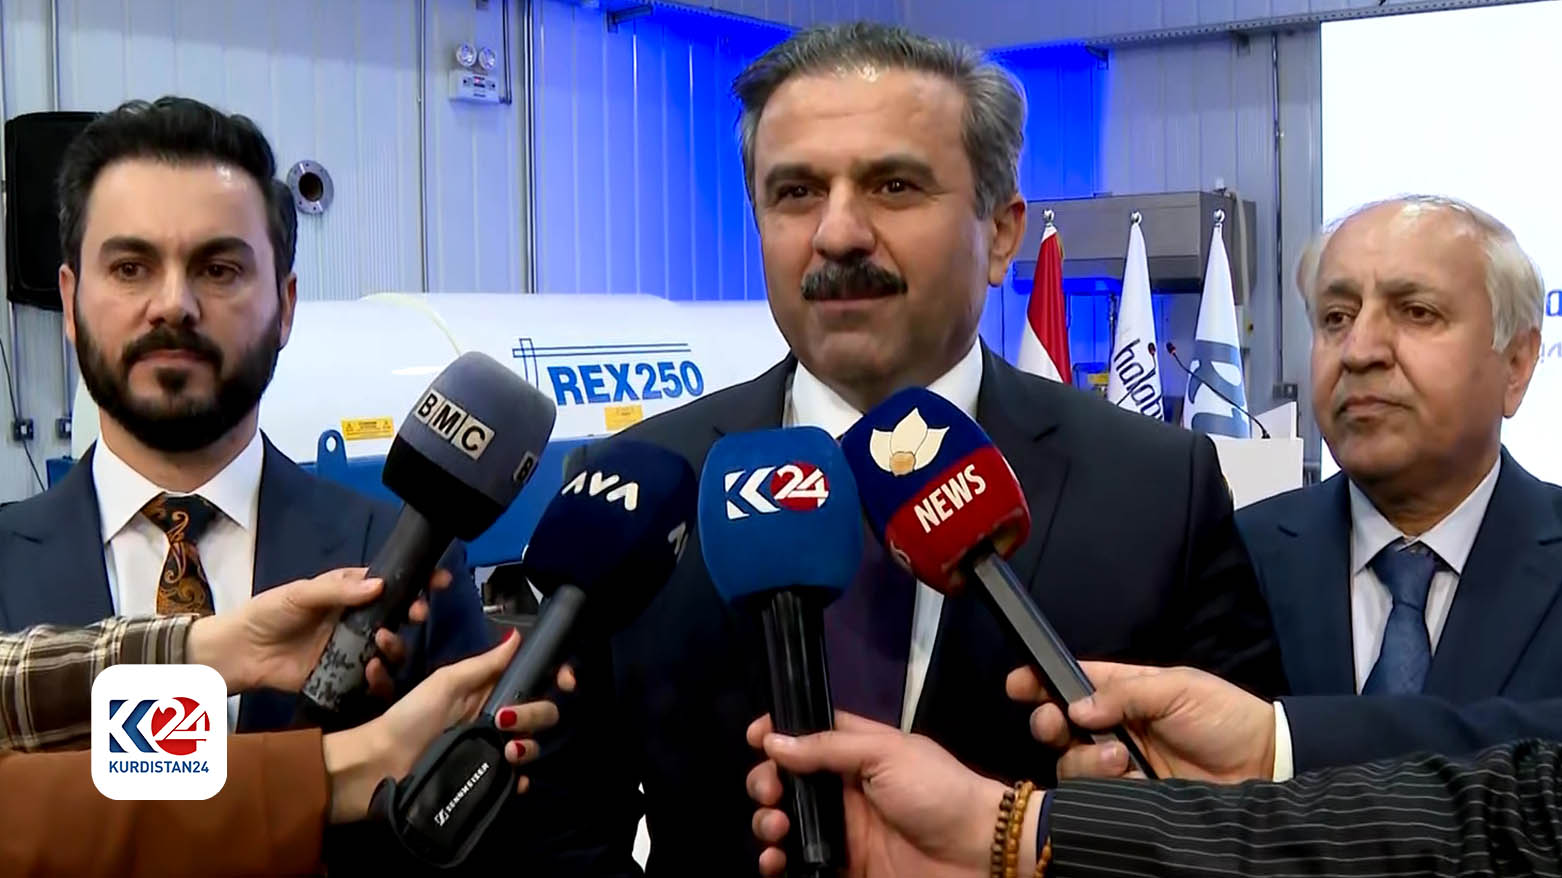 Prime Minister turns Halabja into special area for investment says KRG Investment Board head